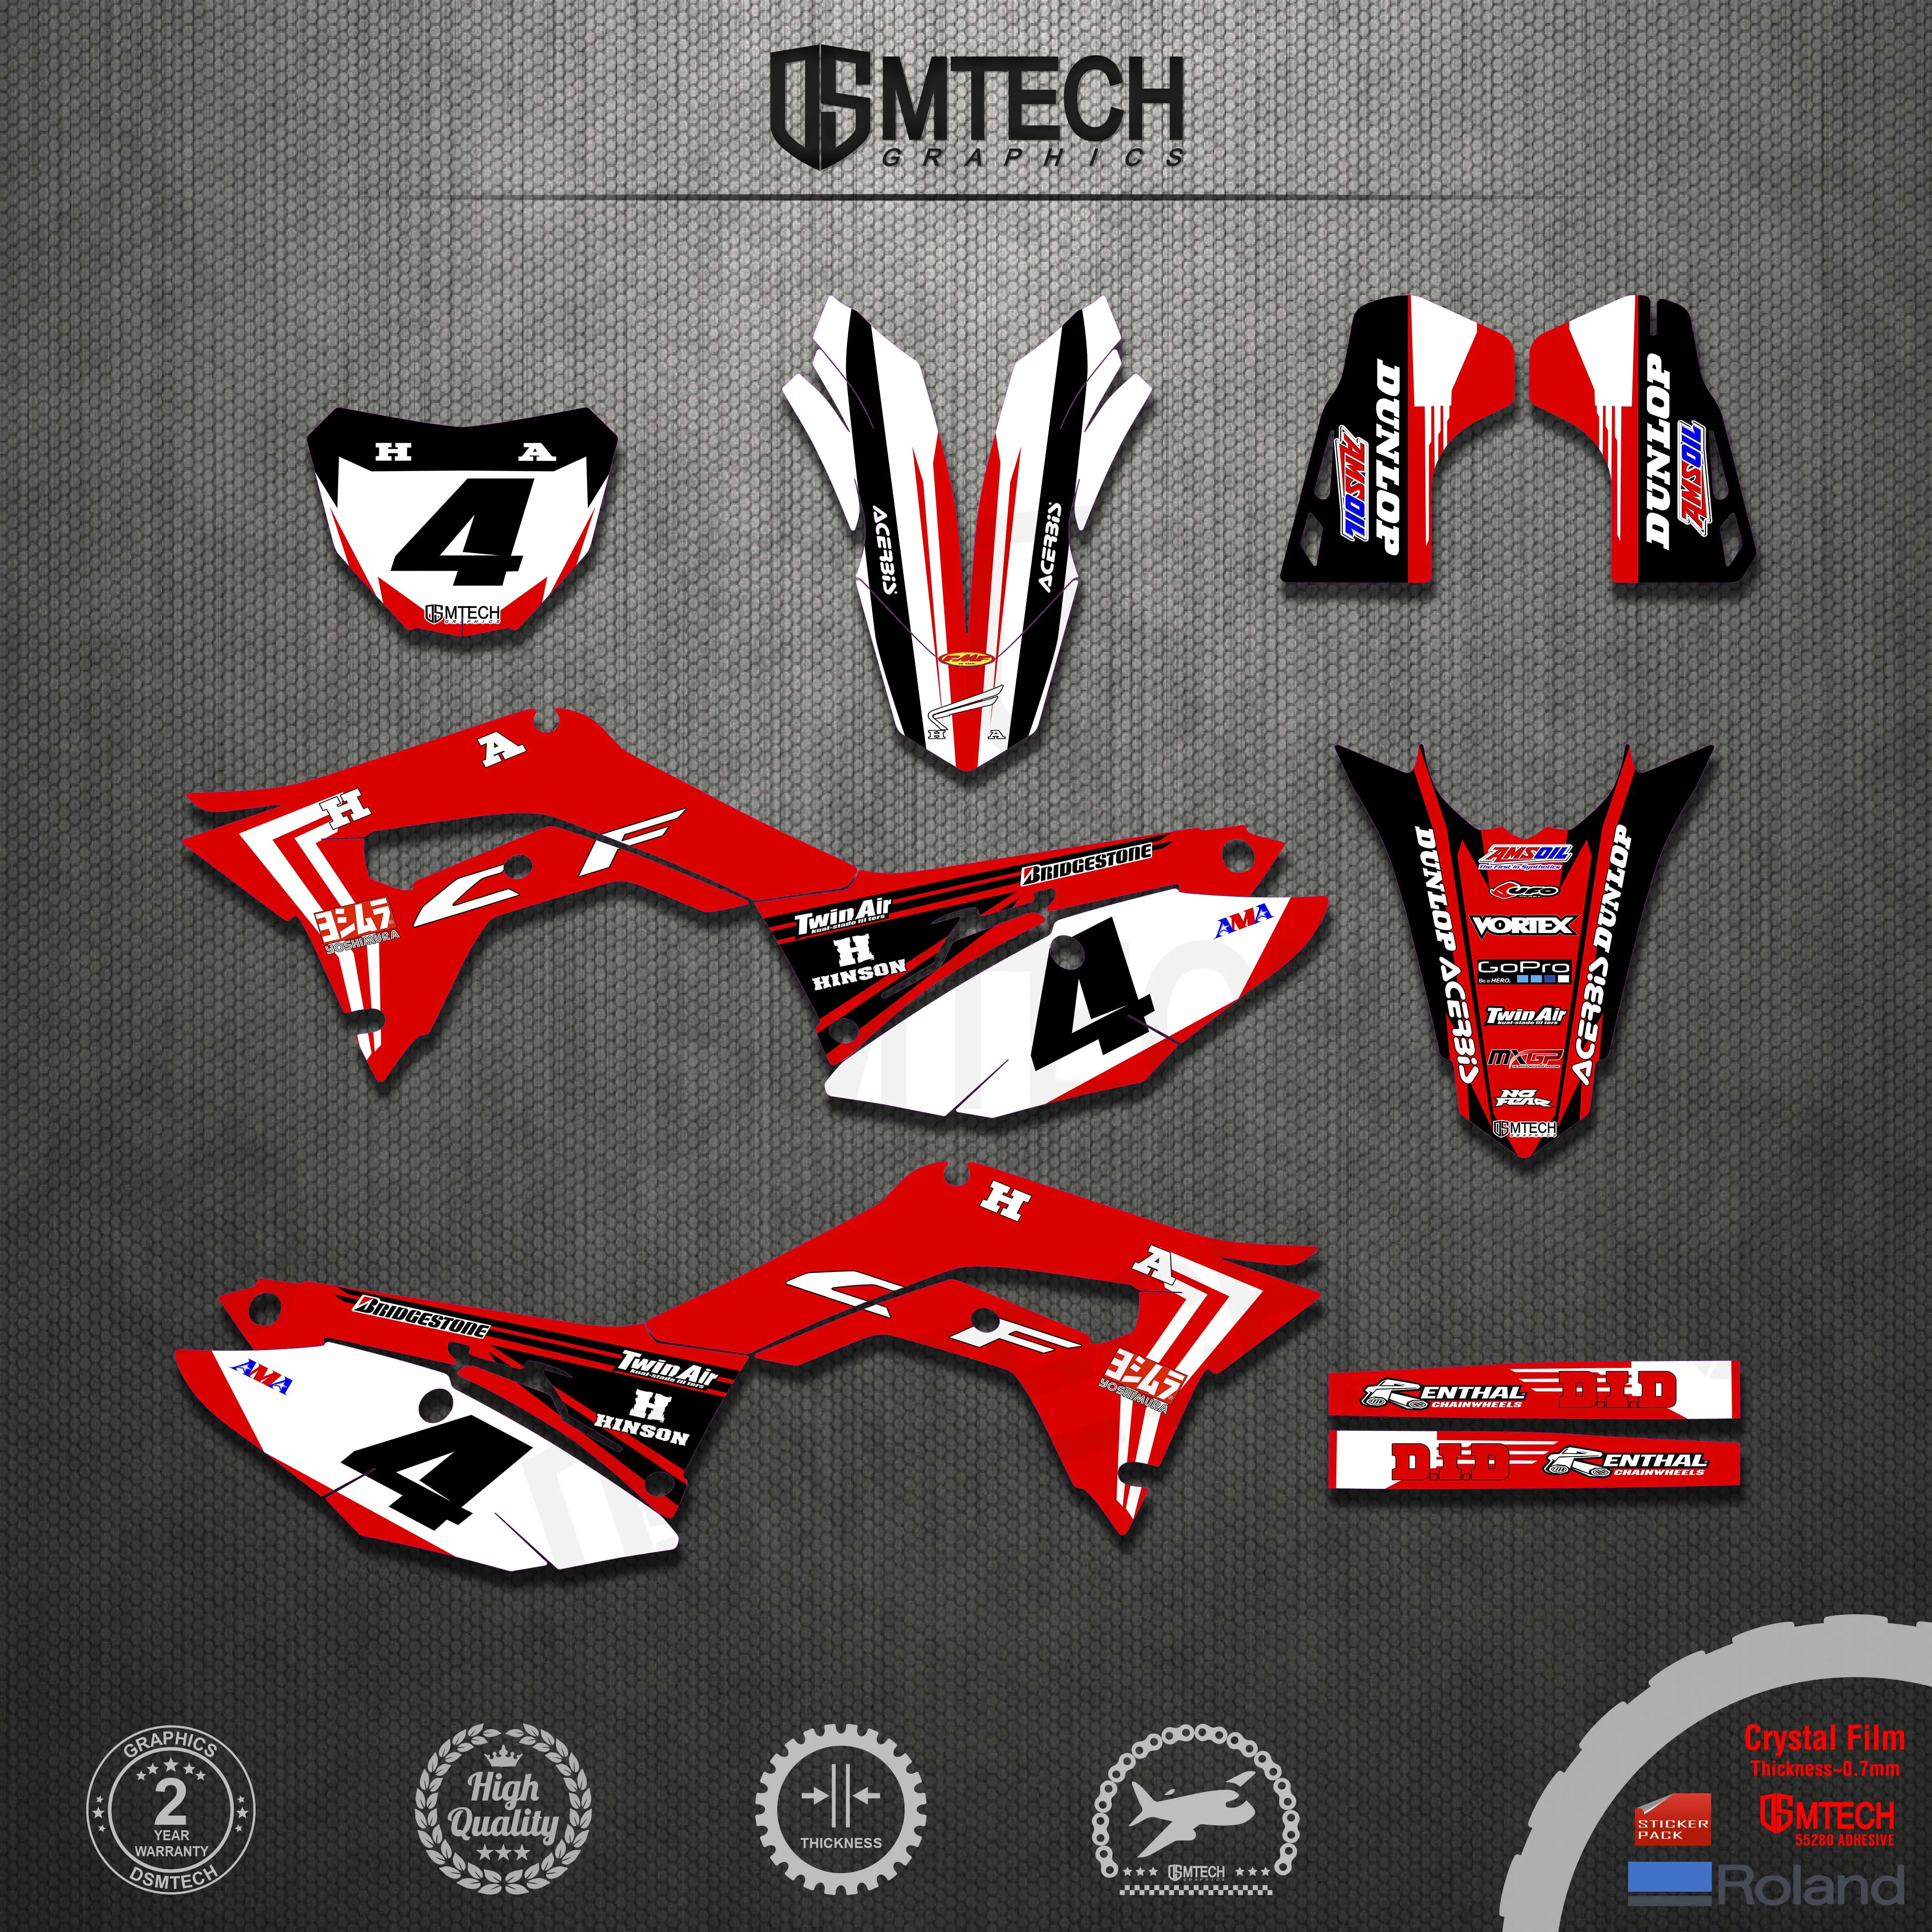 DSMTECH Motorcycle Decals Stickers Backgrounds Graphics For Honda CRF250R 2018 2019 2020 2021 For Honda CRF450R 2017 2018-2020 luckmoto graphics backgrounds decals stickers kits for for honda crf 250r 450r 2017 2018 2019 2020 motocross decals